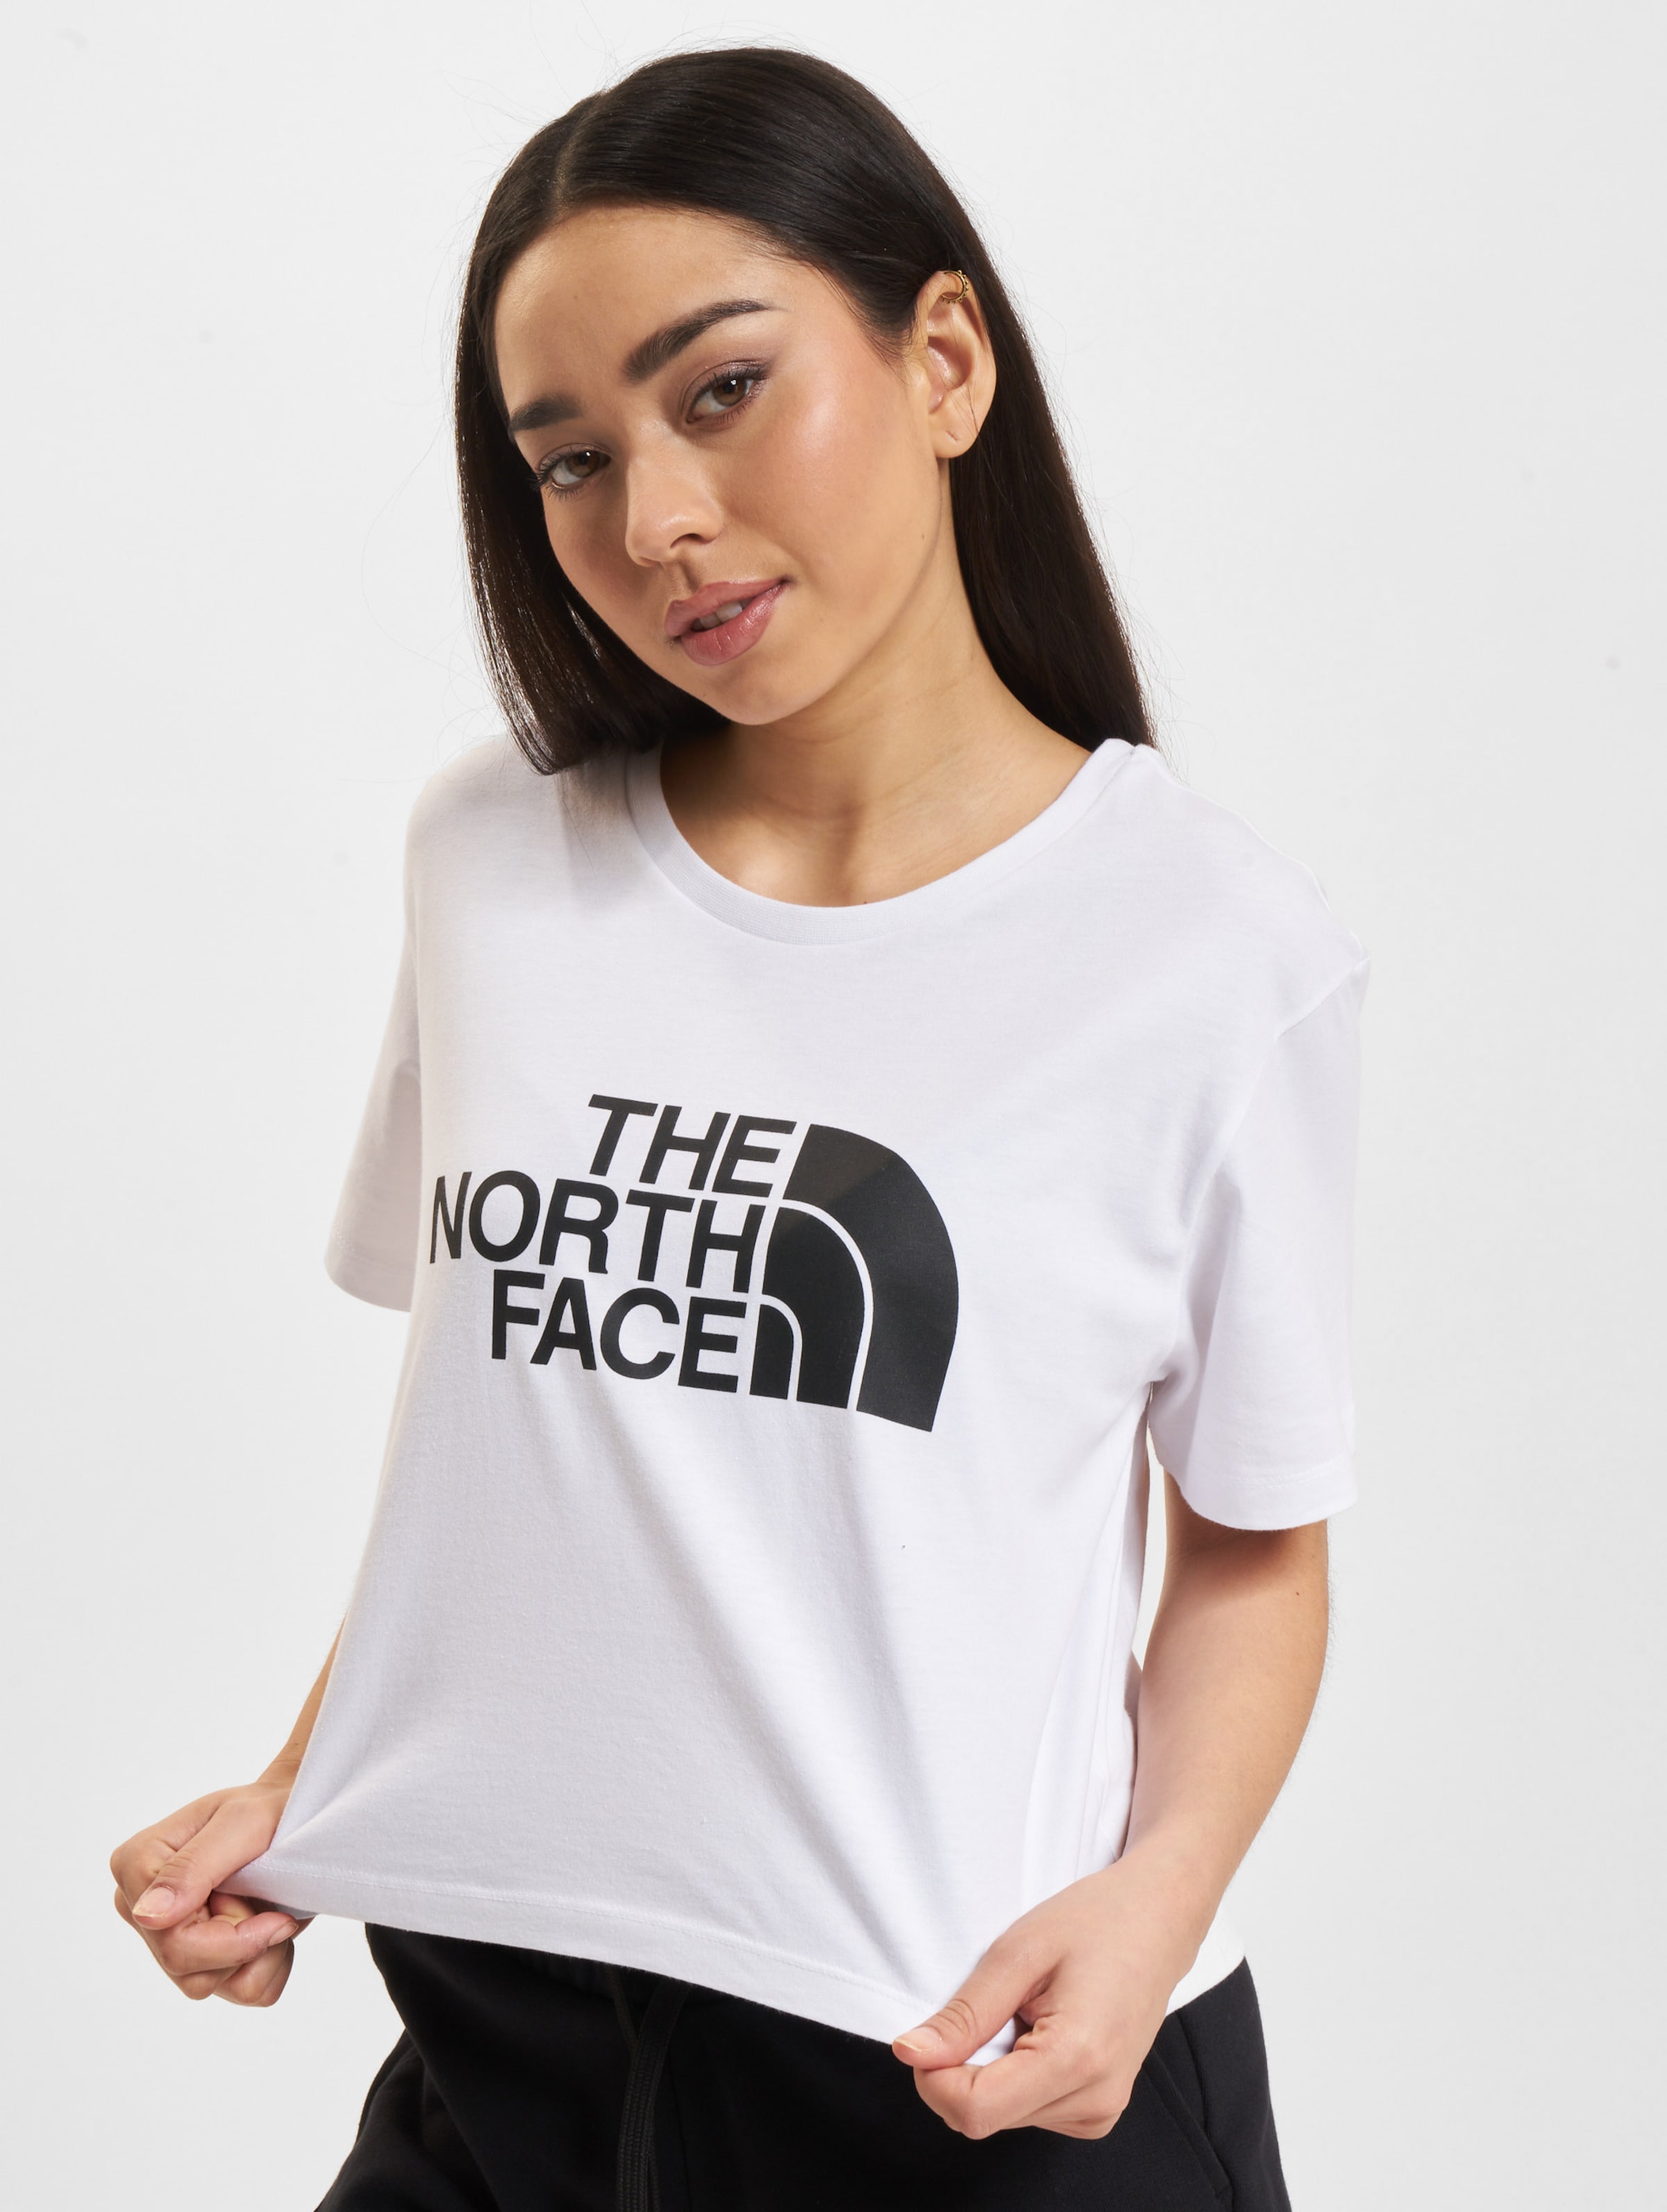 The North Face Cropped Easy T-Shirts Vrouwen op kleur wit, Maat M